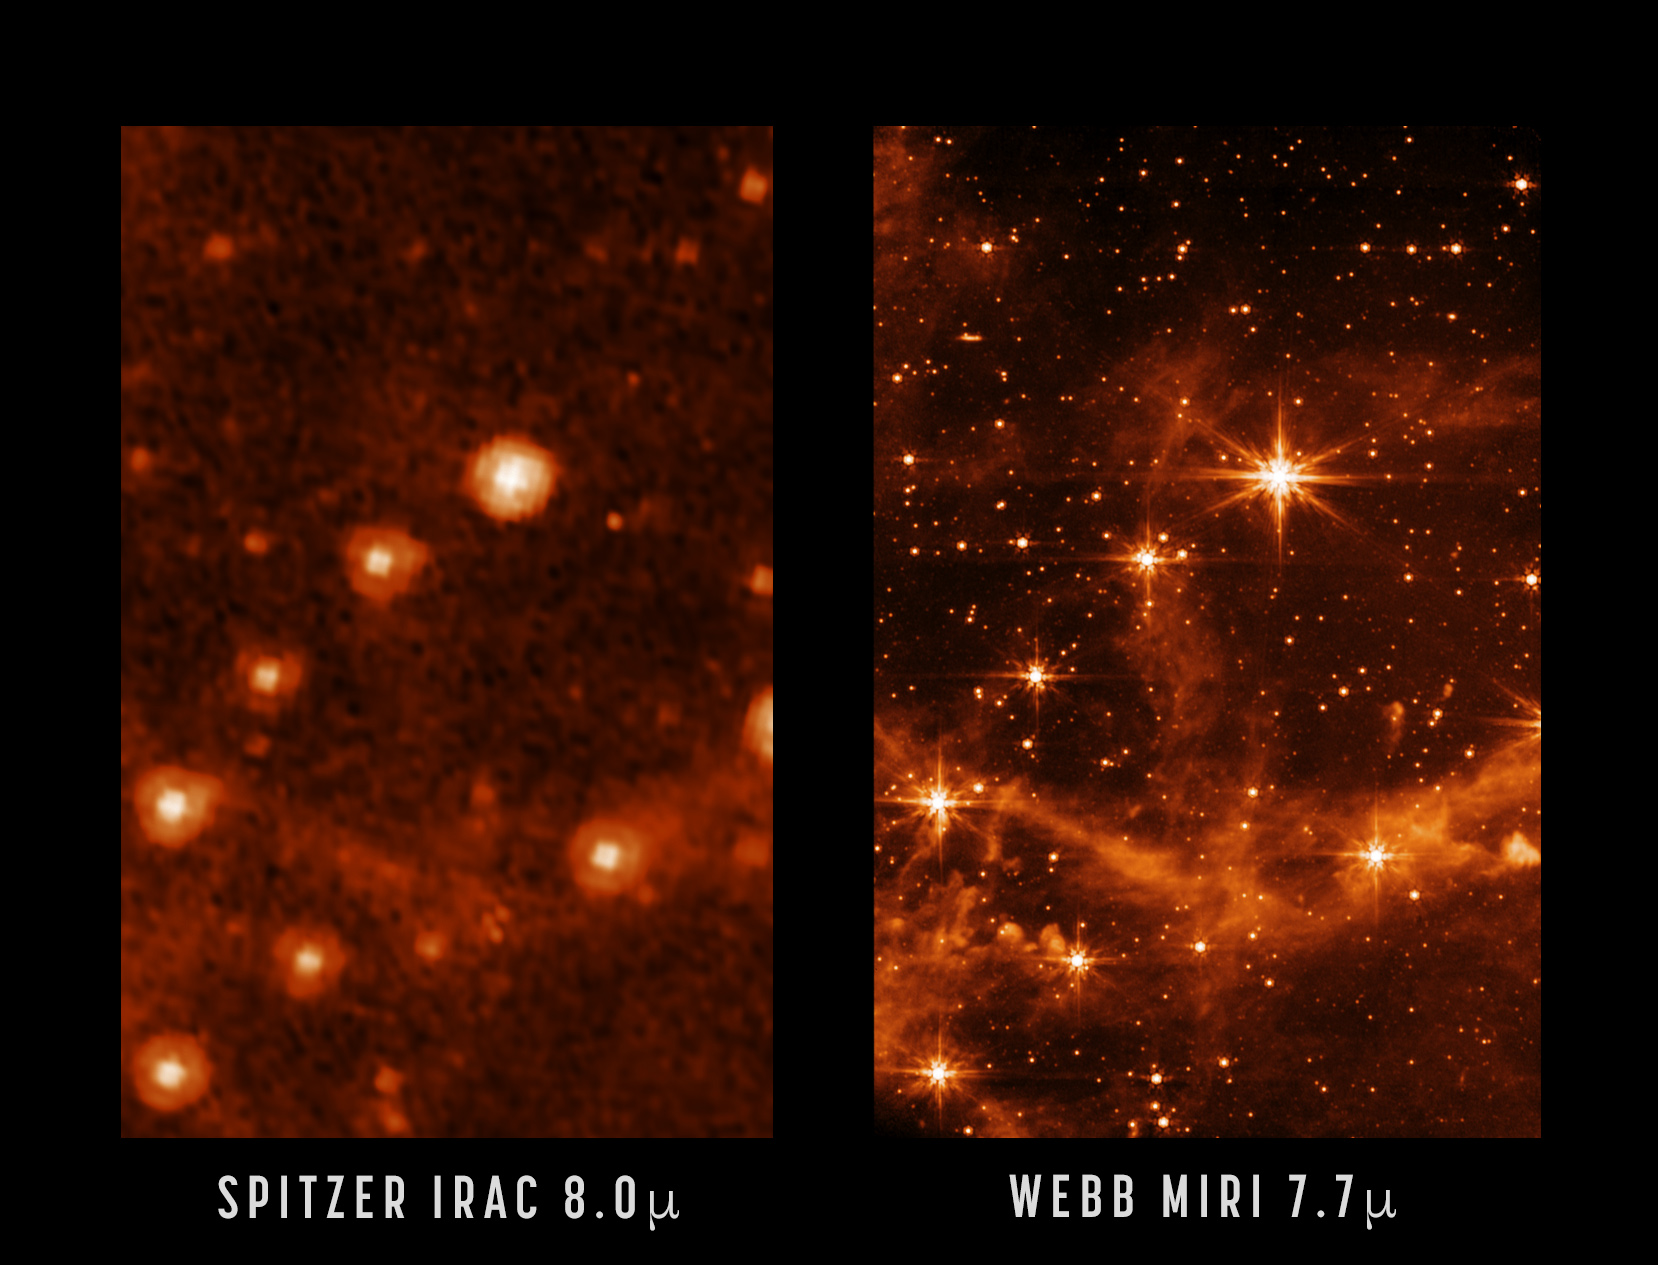 James Webb's photo quality compared to Spitzer